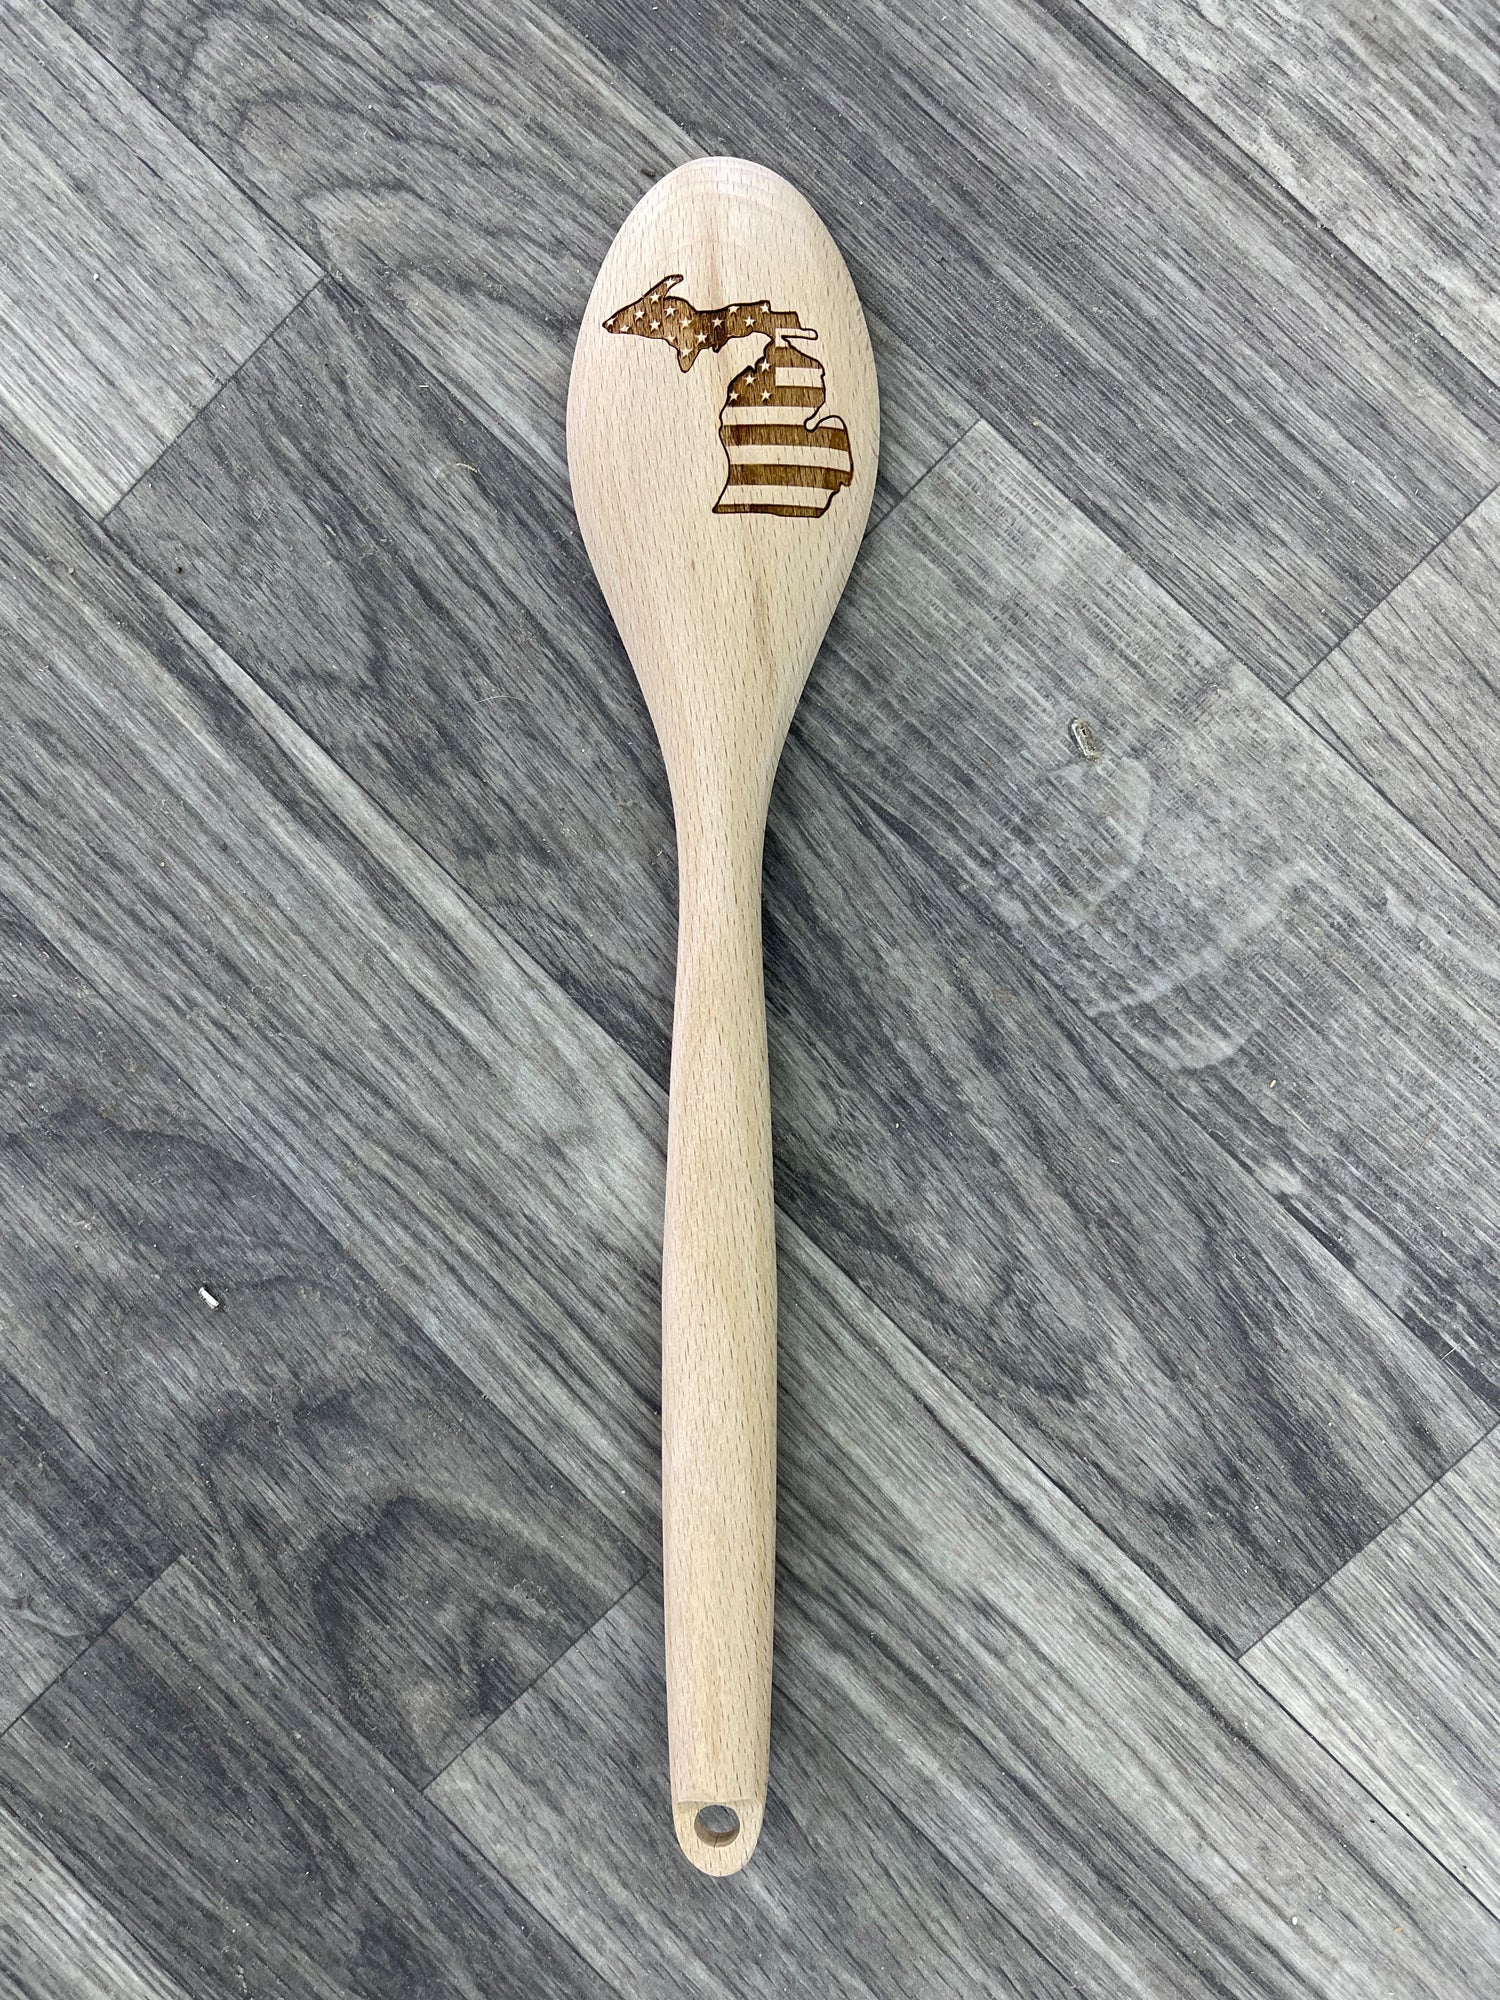 American Flag Michigan Wooden Engraved Spoon